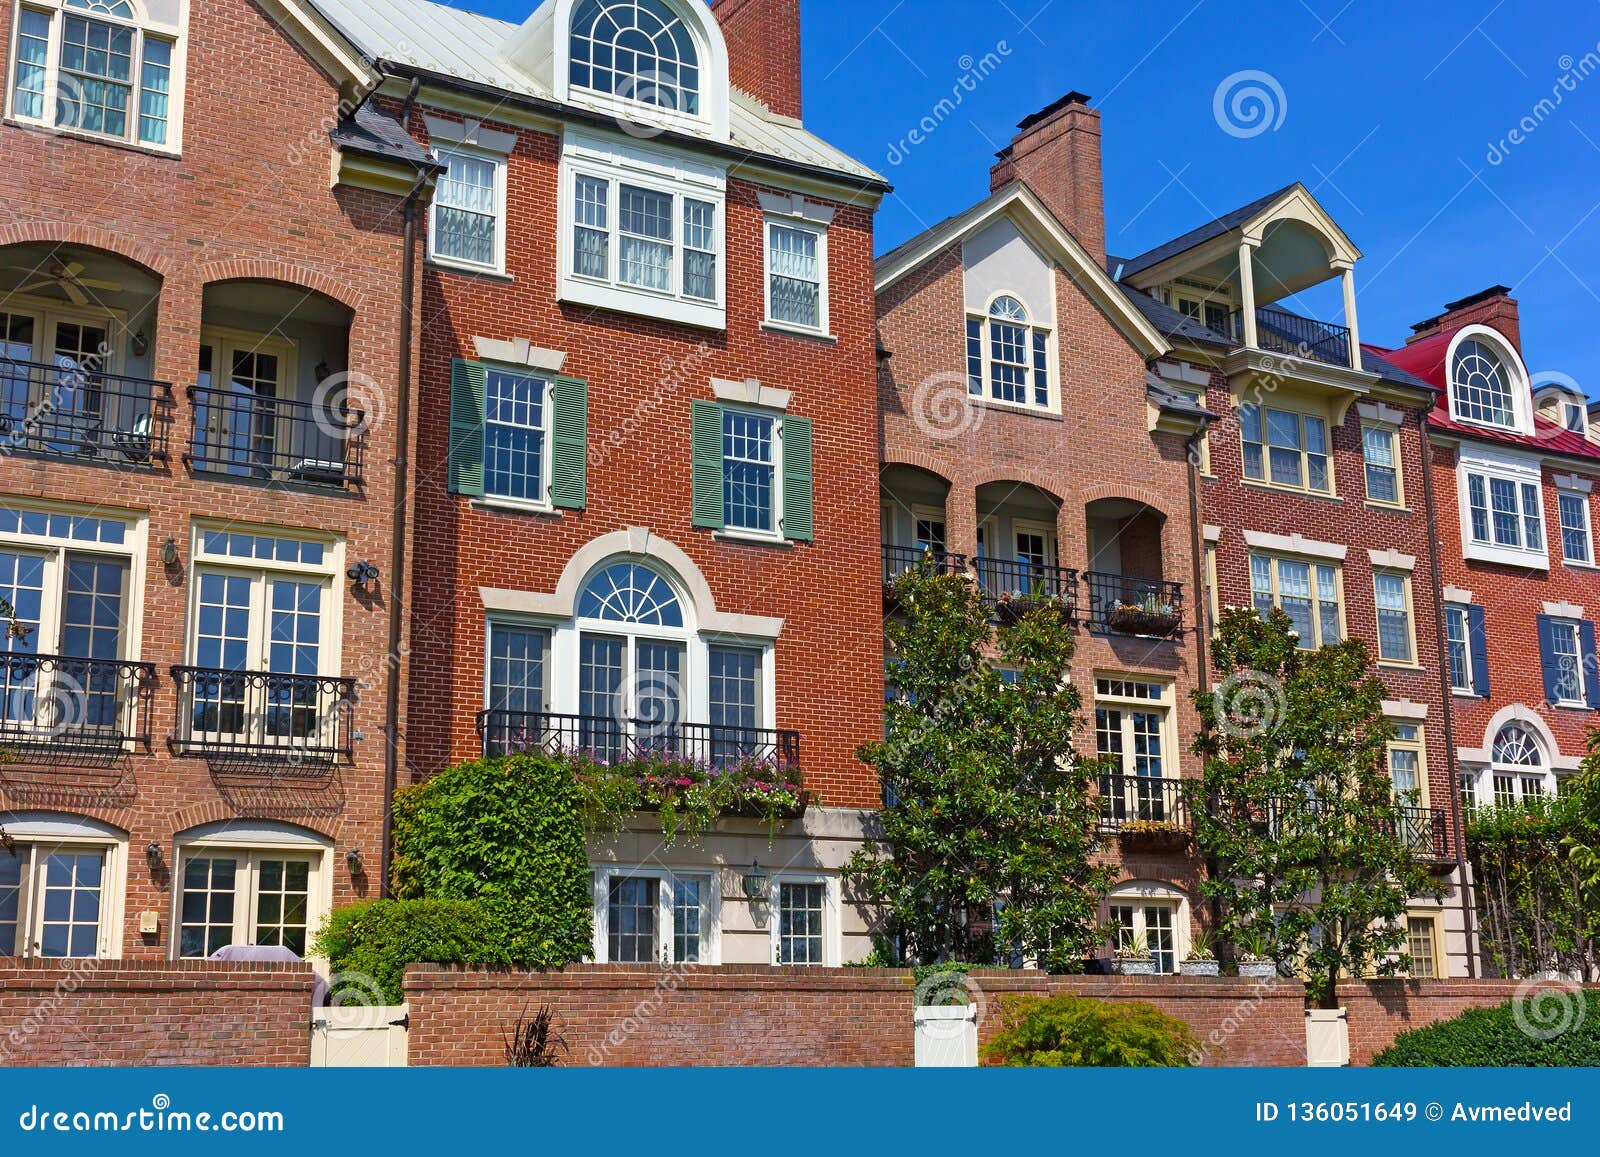 modern townhouses at old town alexandria waterfront in virginia, usa.